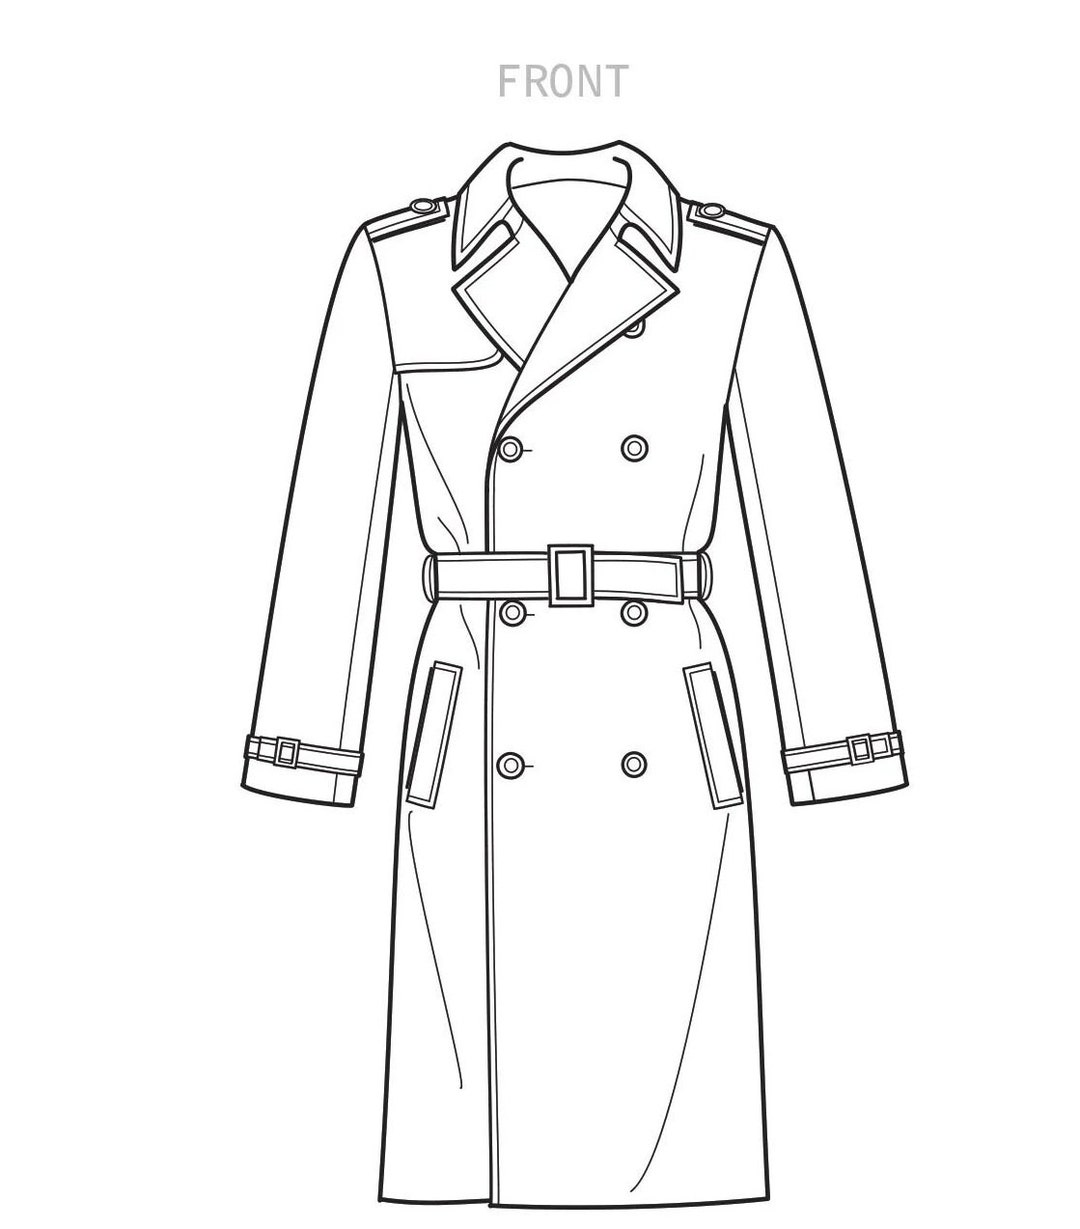 S9389 Sewing Pattern Simplicity 9389 Men's Trench Coat in 2 Lengths ...